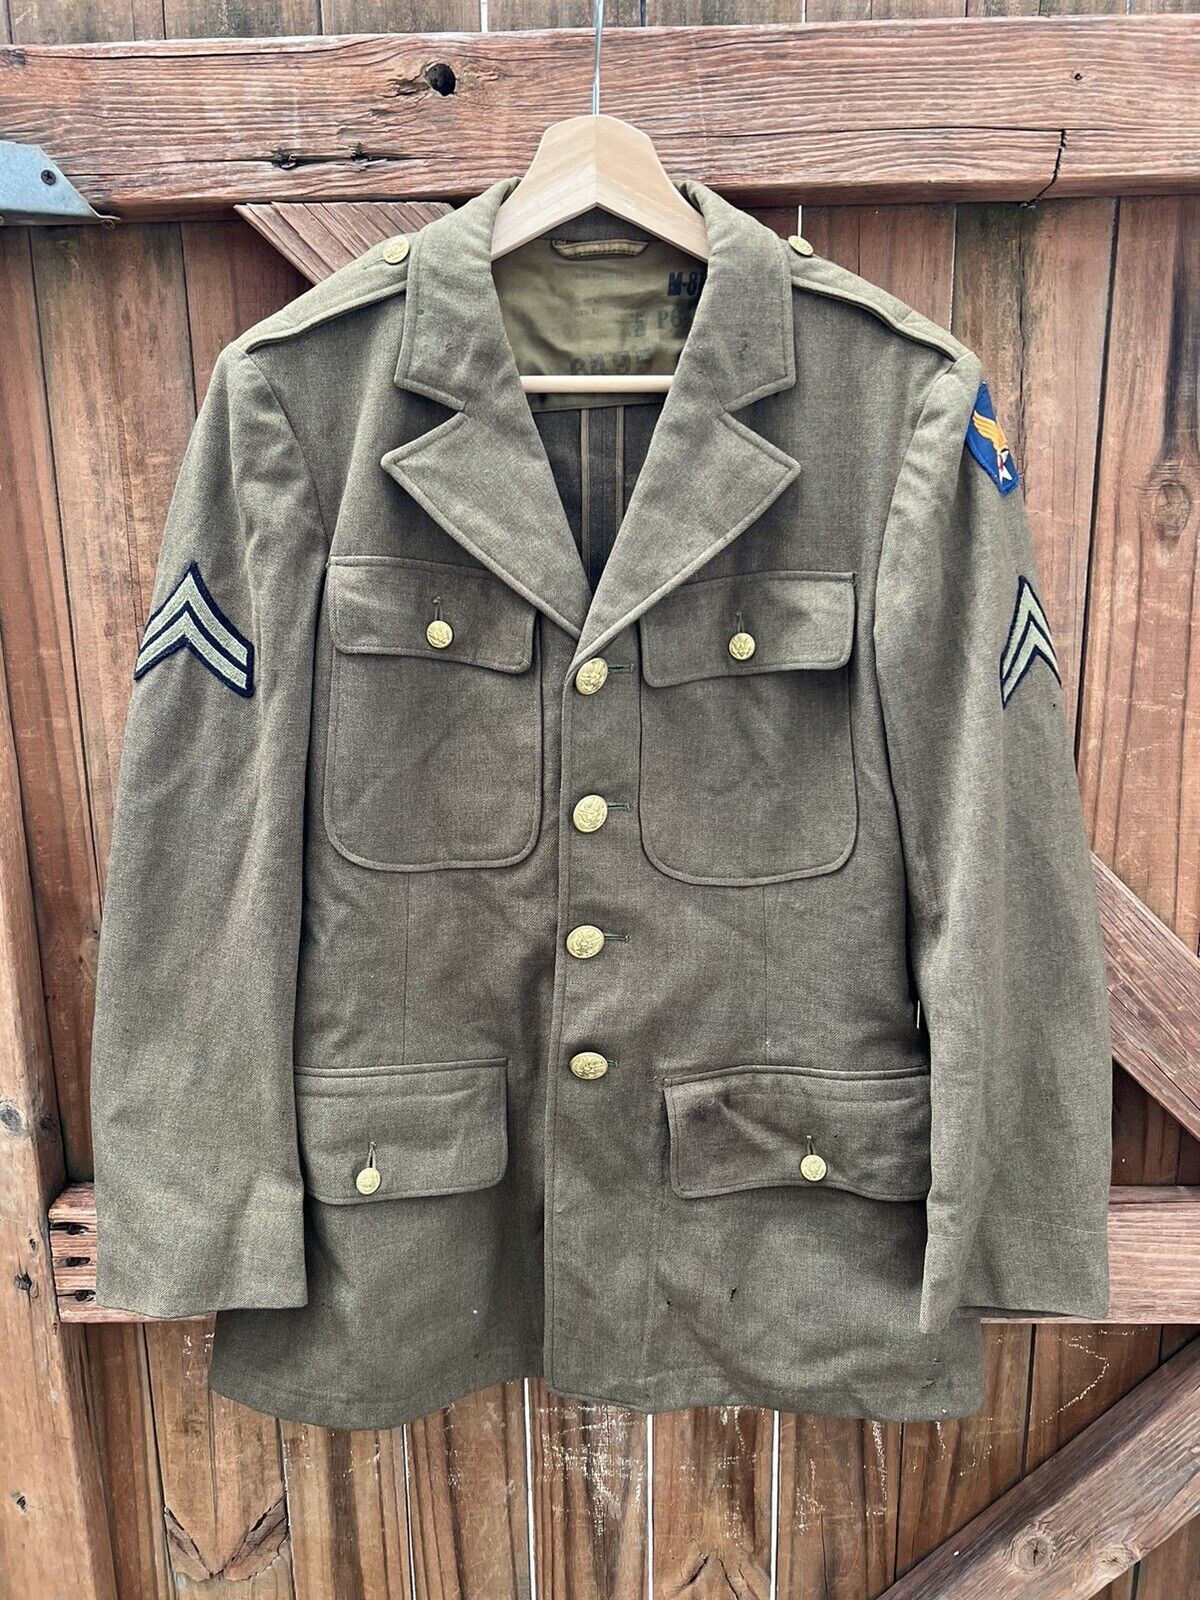 Vtg WW2 US Army Air Corps USAAF Air Forces Uniform Jacket Coat Corporal Patches